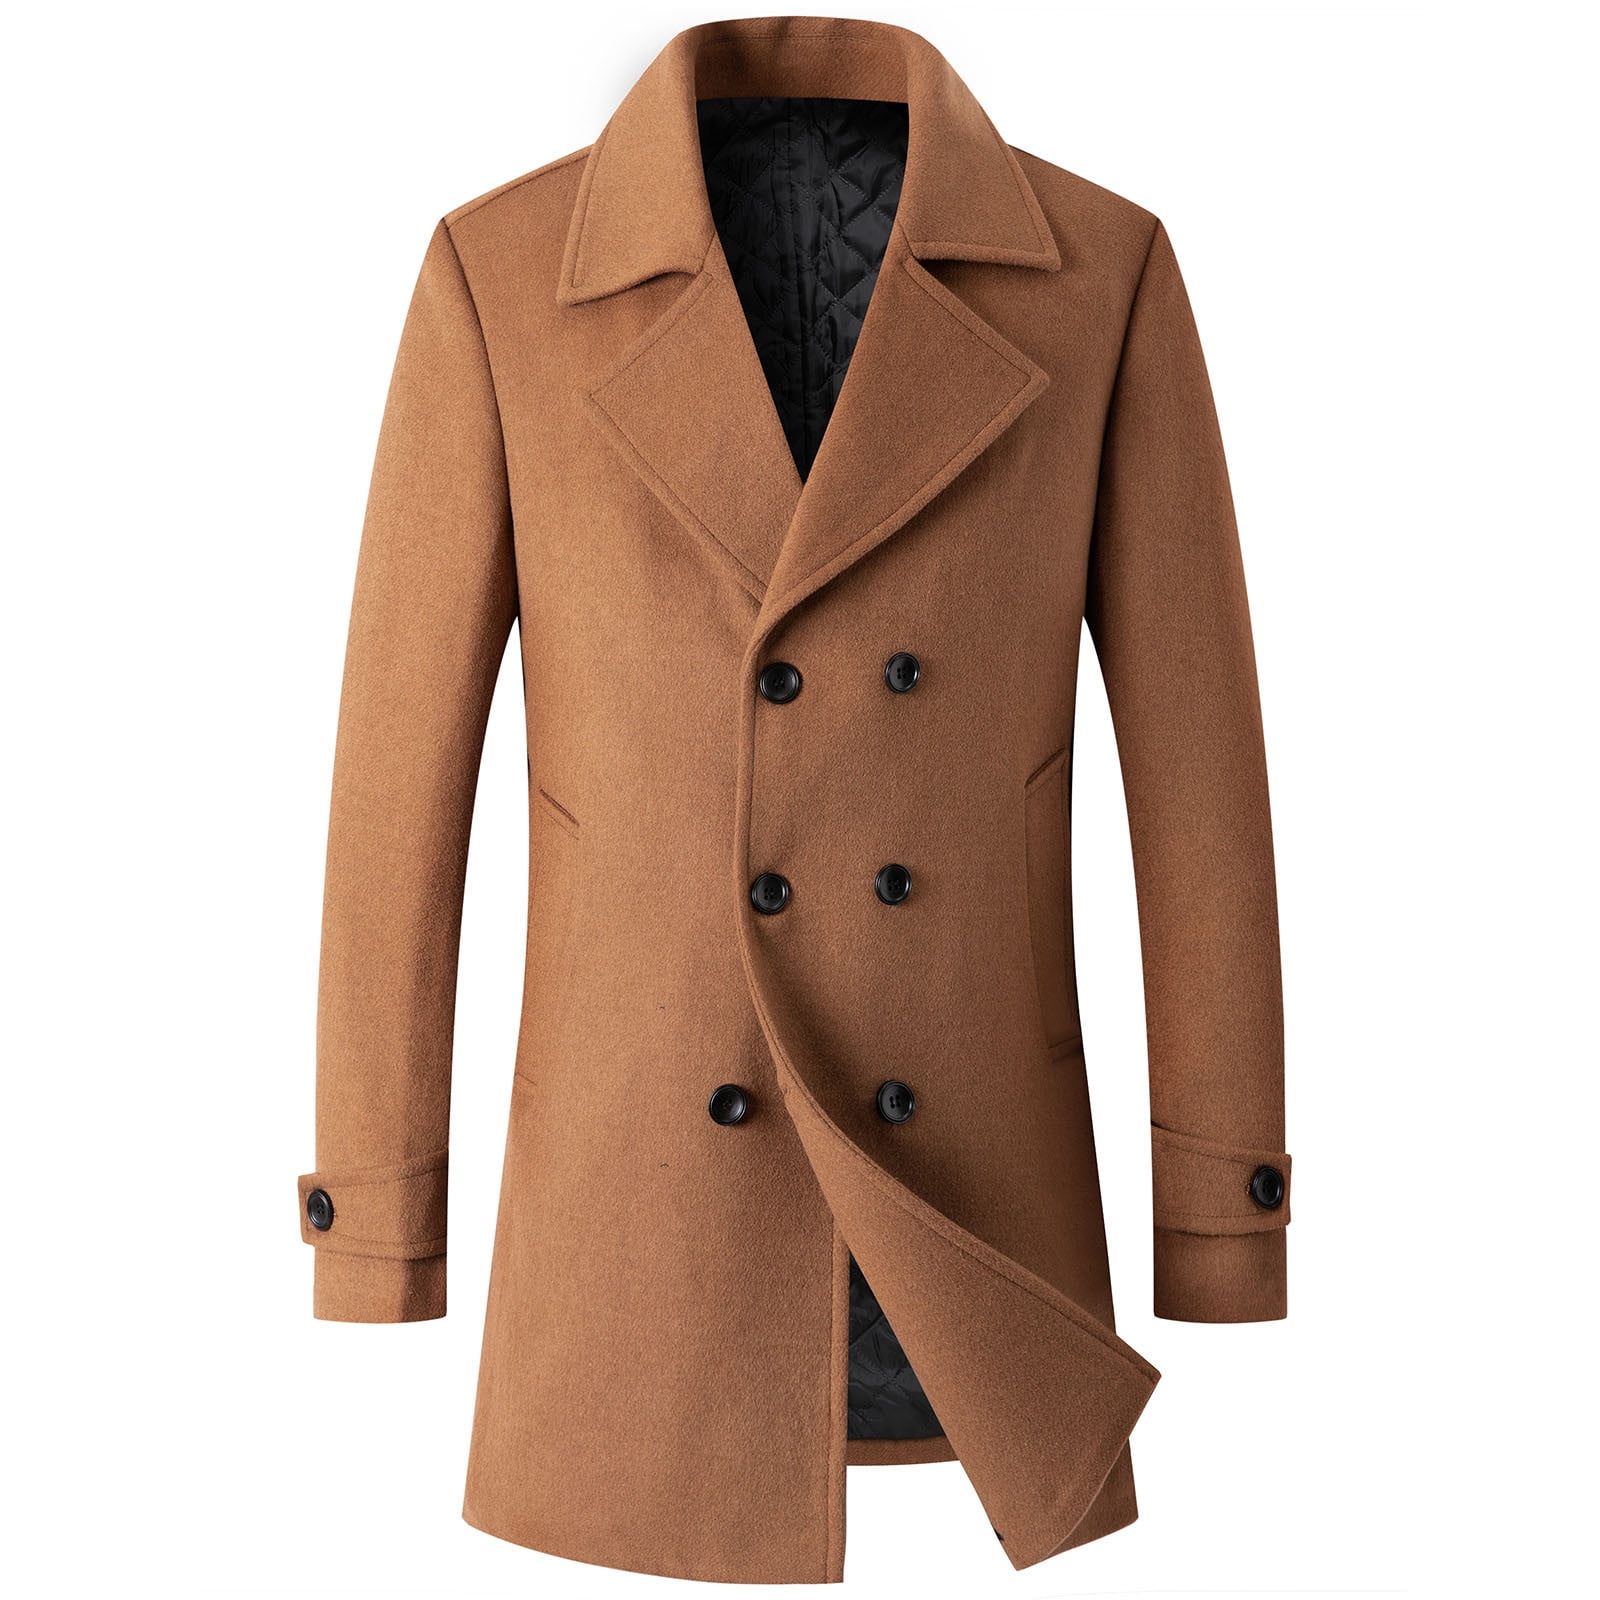 Mossimo brand new, Women's Fashion, Coats, Jackets and Outerwear